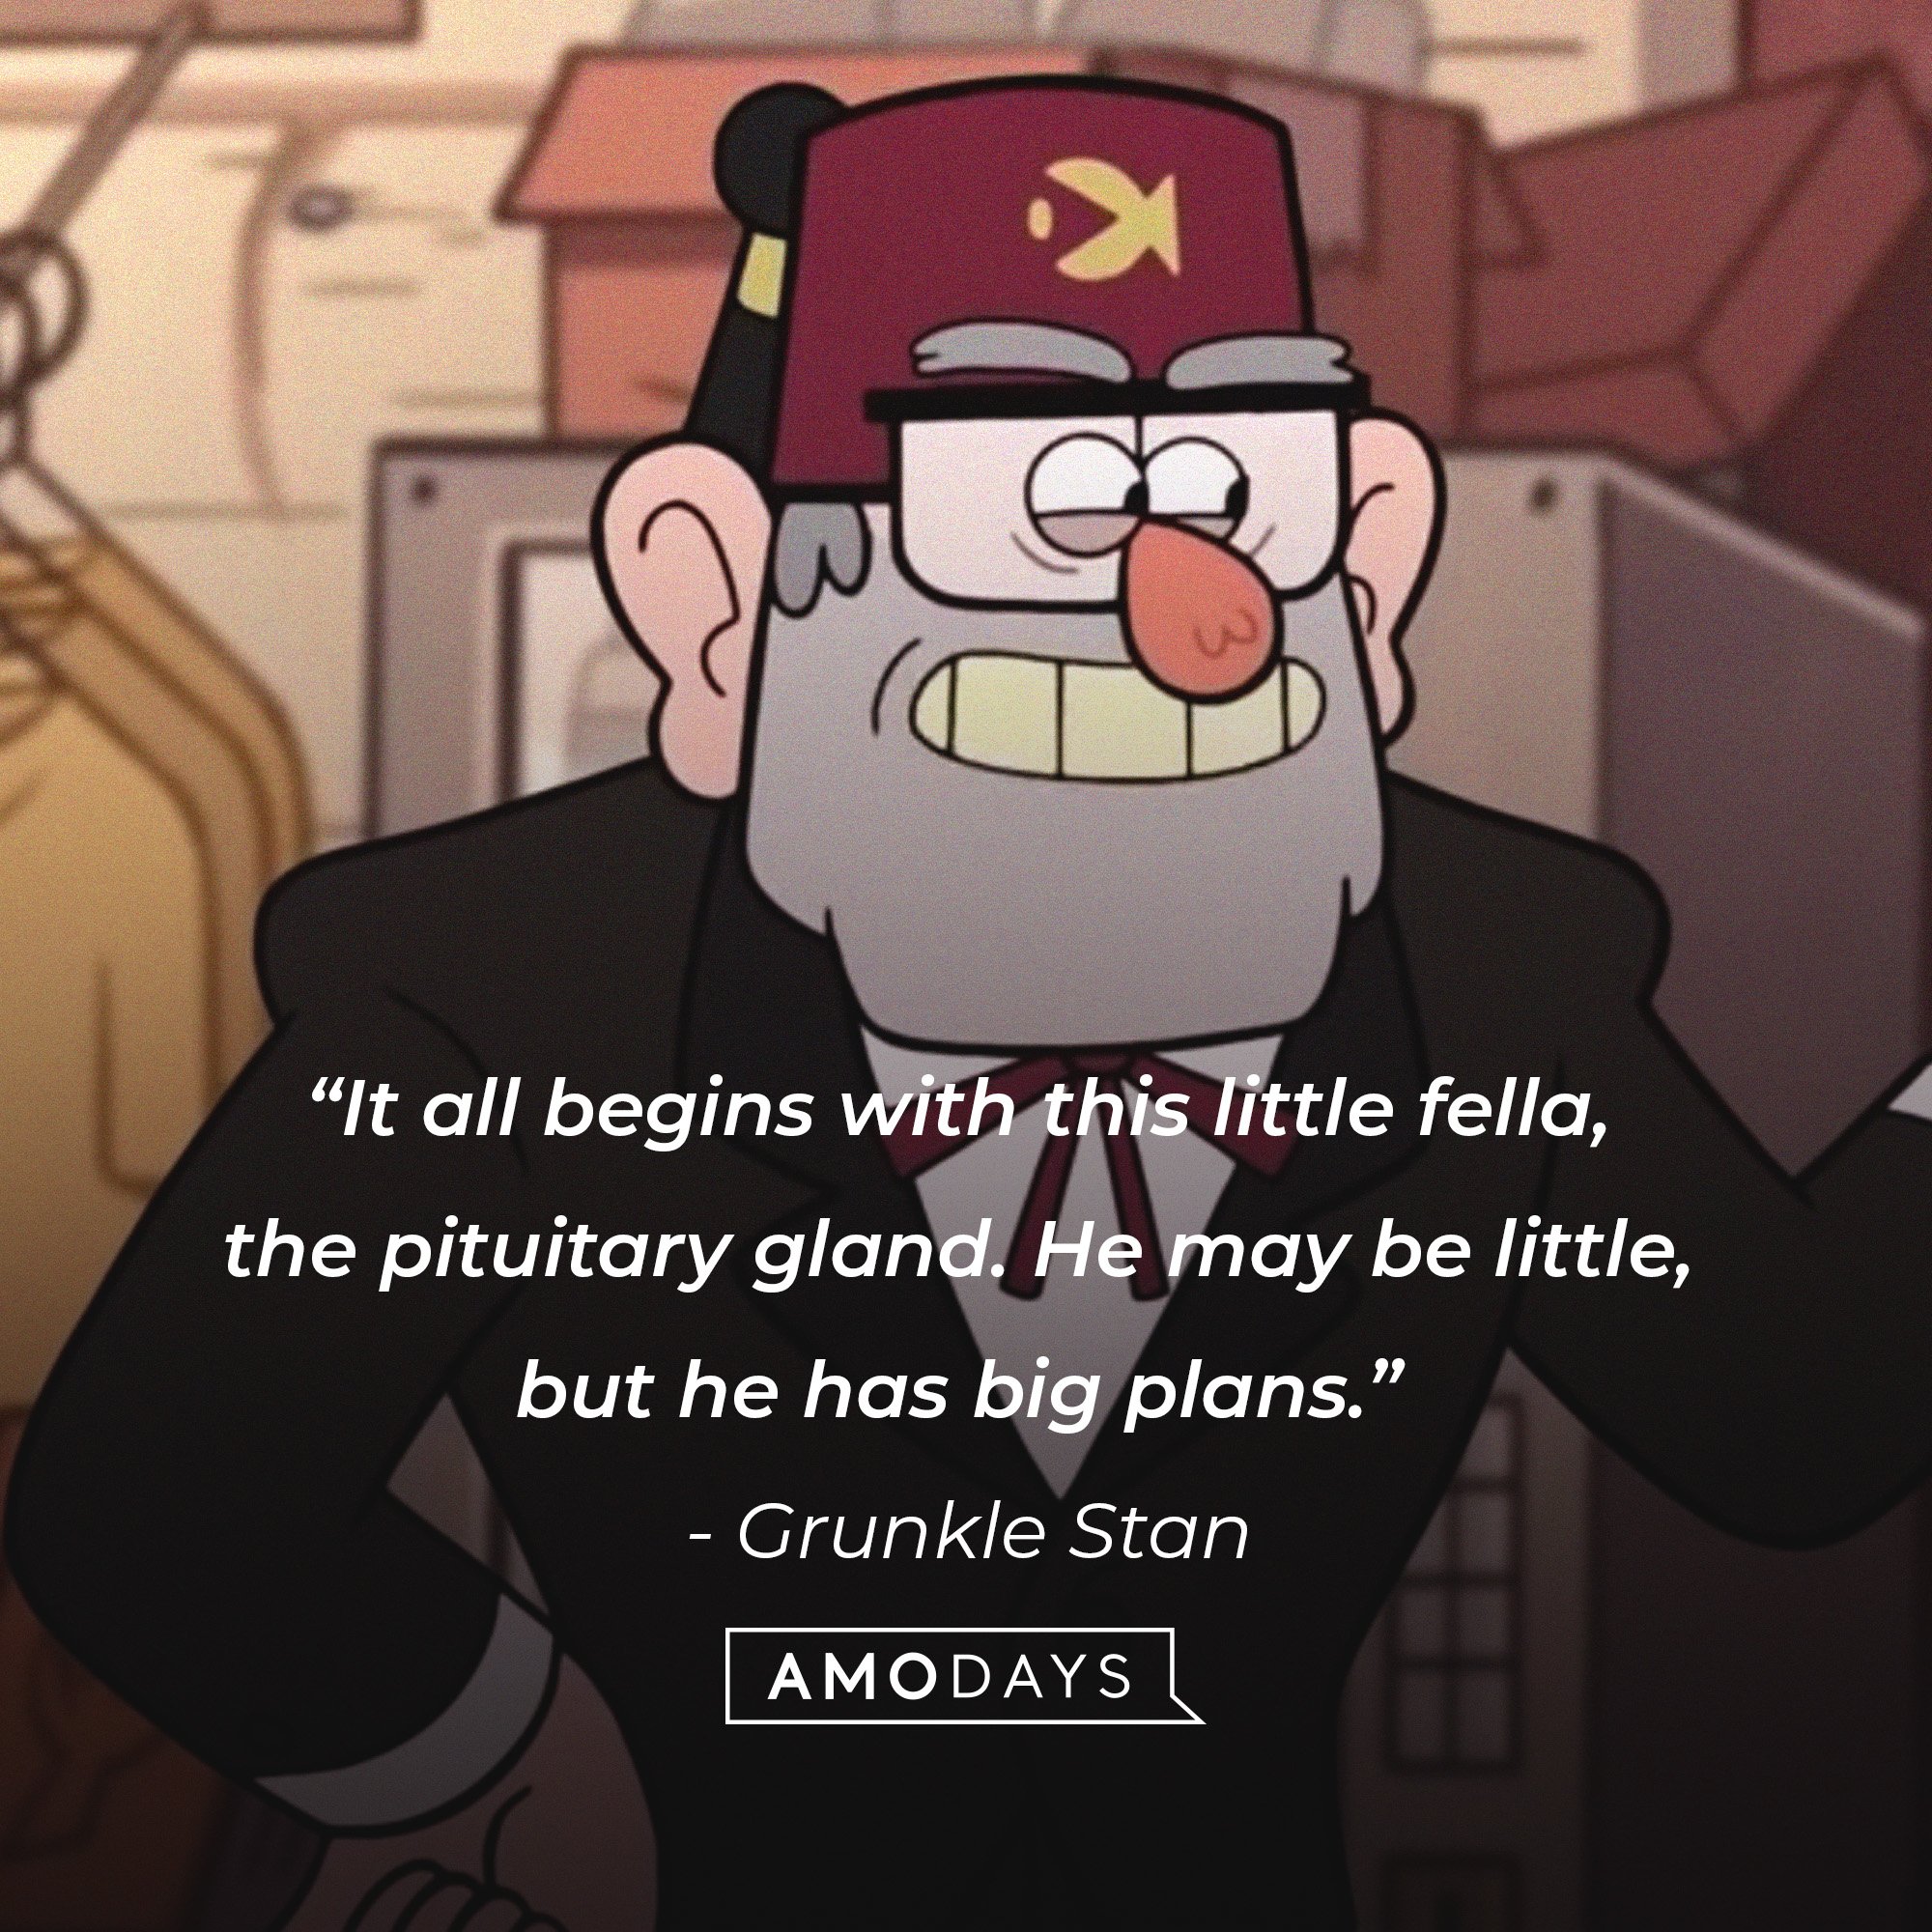 Grunkle Stan’s quote: “It all begins with this little fella, the pituitary gland. He may be little, but he has big plans.” | Image: AmoDays